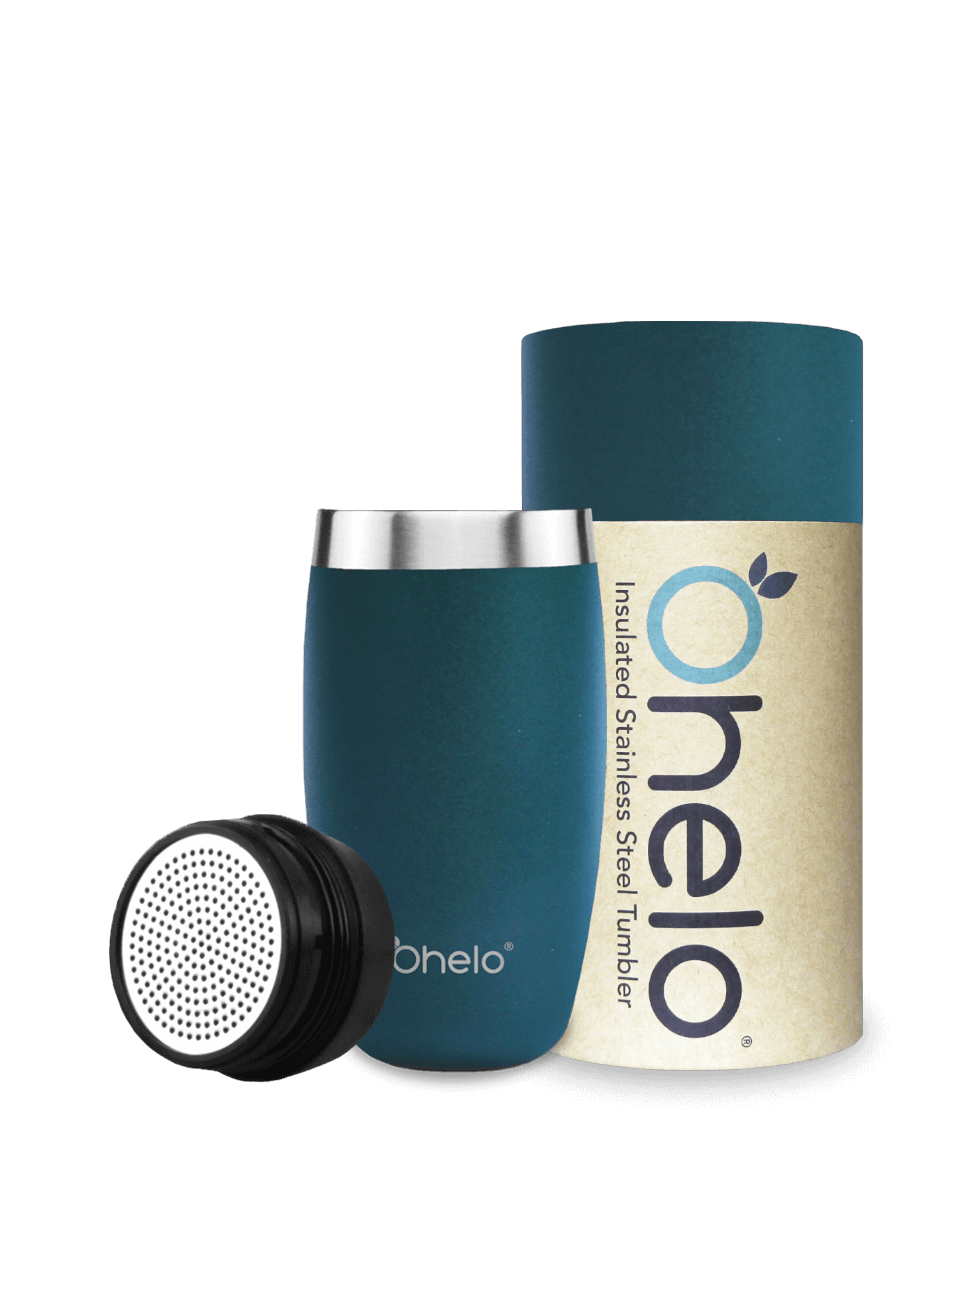 Ohelo dishwasher safe travel mug in British racing green with removable tea strainer and recycled packaging